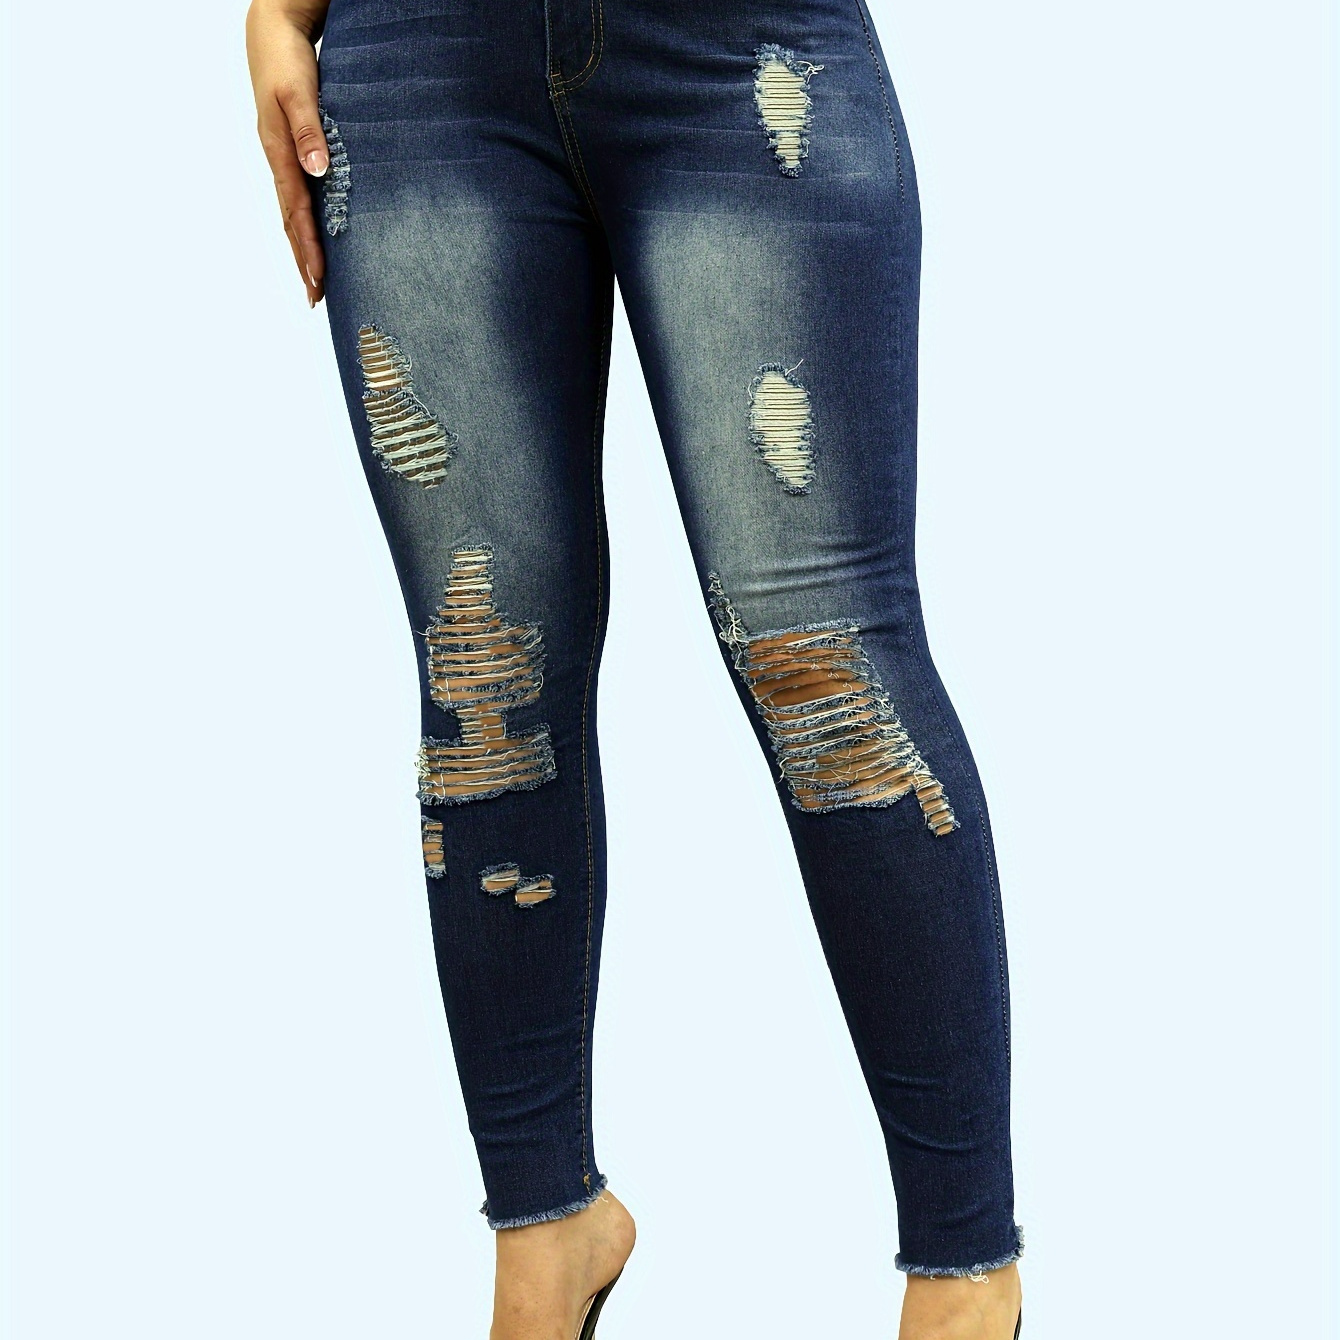 

Ripped Holes Washed Skinny Jeans, Raw Trim High-stretch Fashion Fitted Denim Pants, Women's Denim Jeans & Clothing